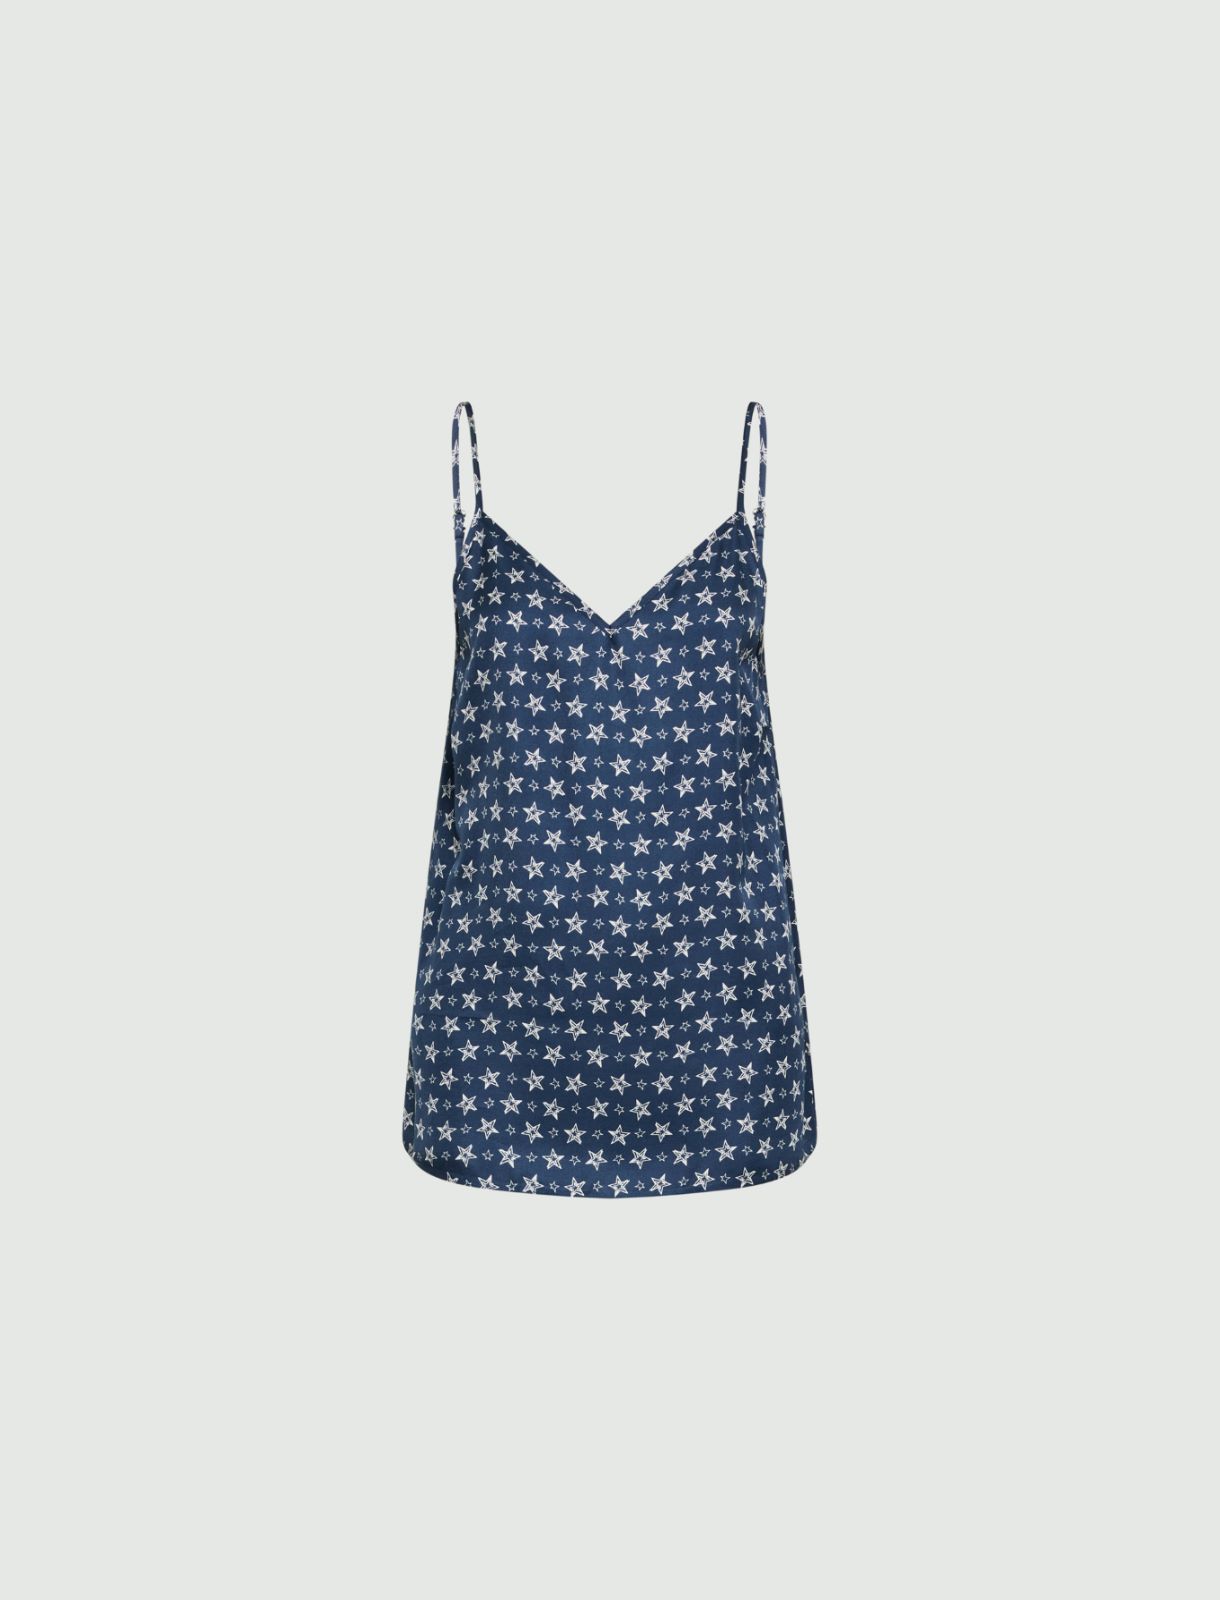 Patterned top - Navy - Marella - 5